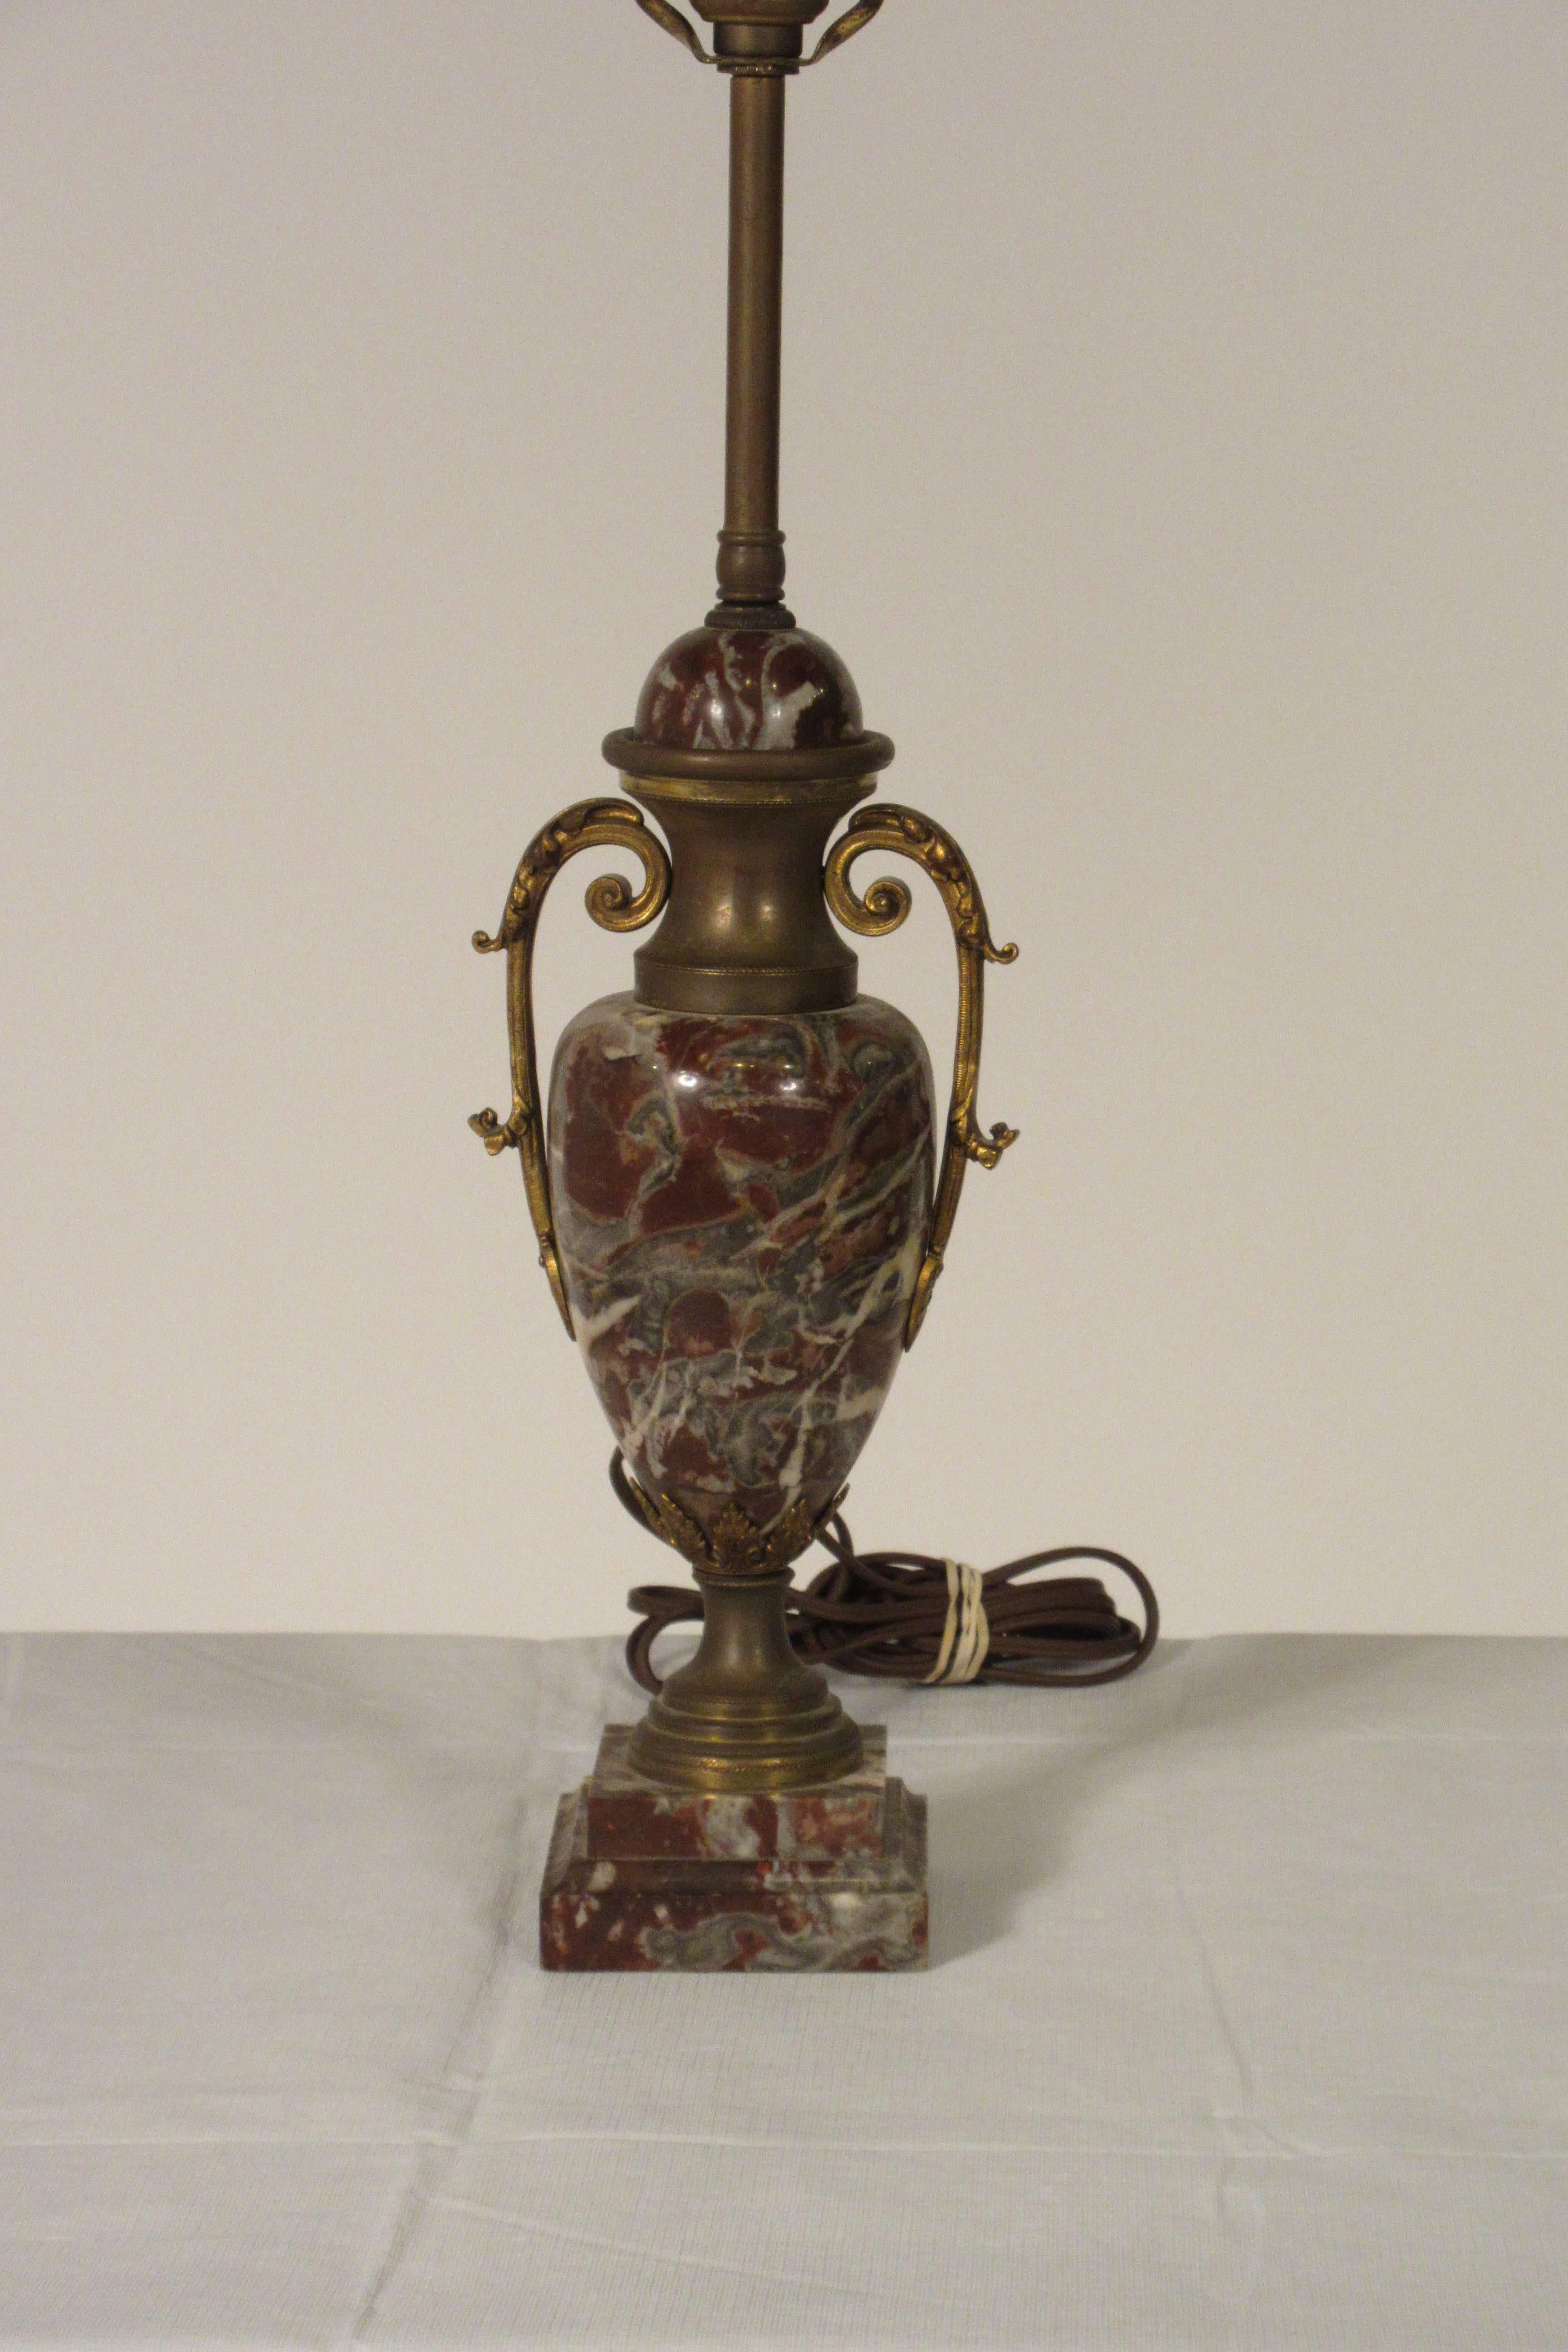 1930s French marble table lamp with brass accents.